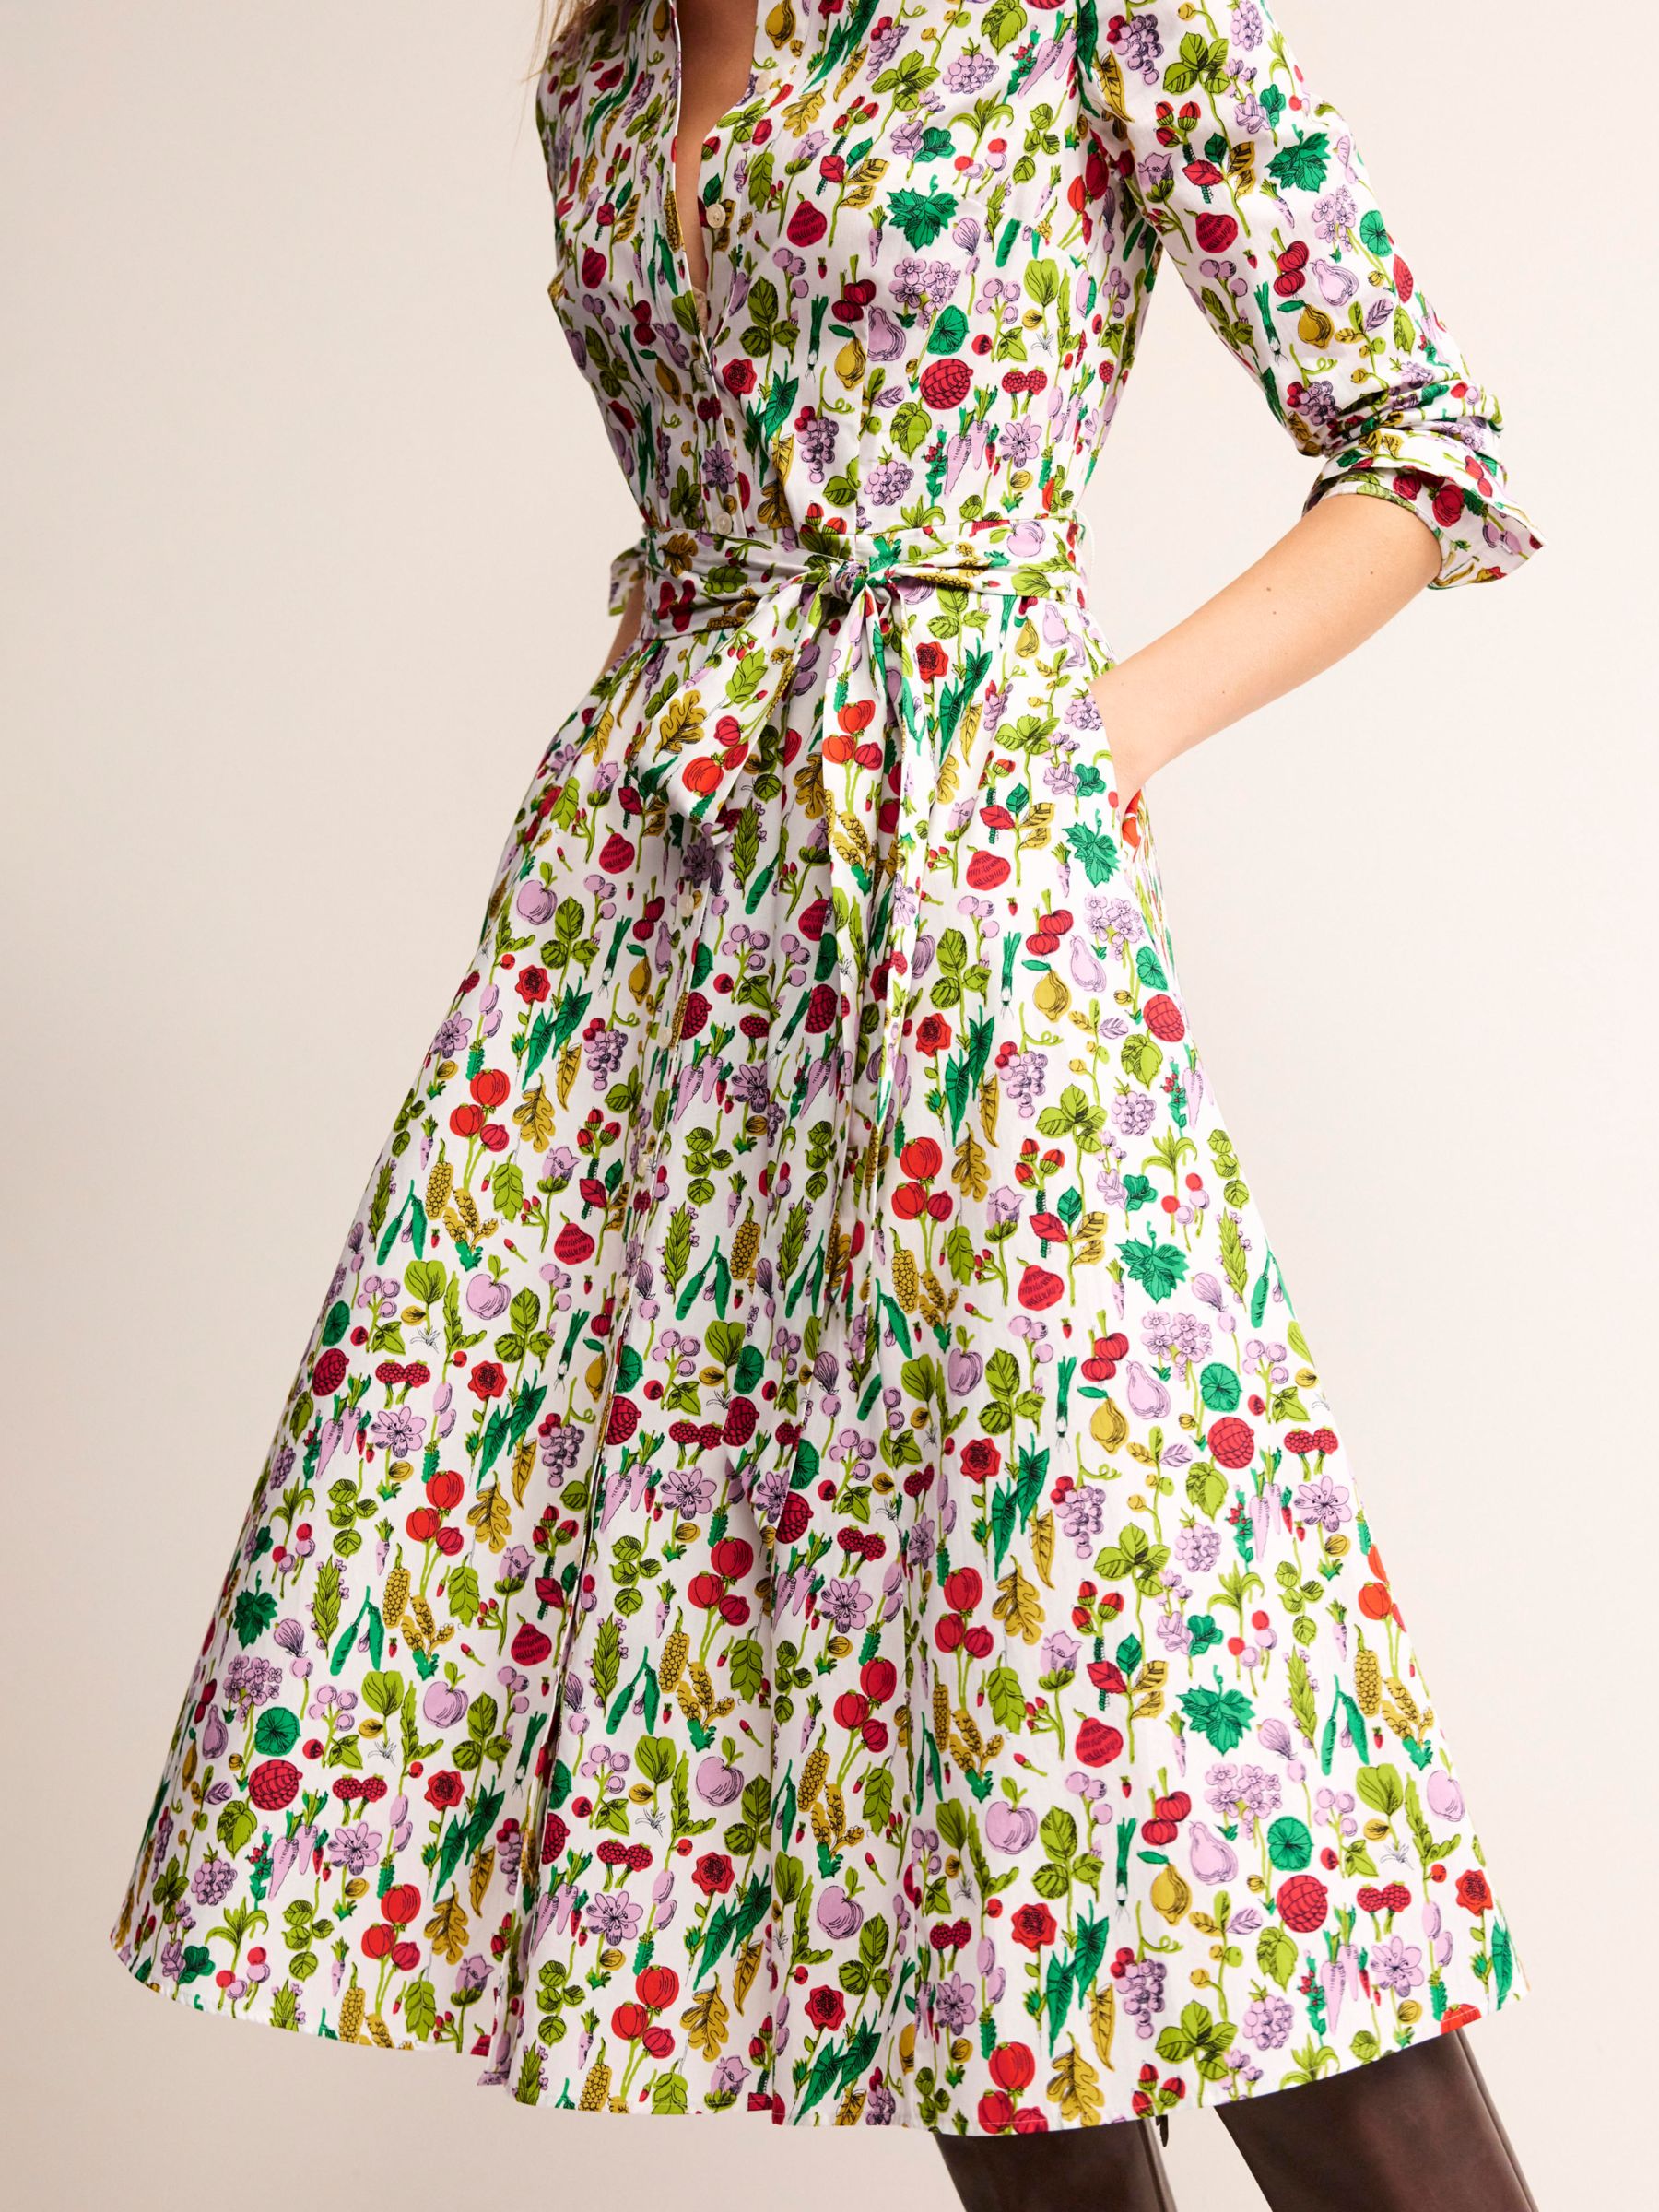 Boden Amy Cotton Floral Midi Dress, Ivory/Multi at John Lewis & Partners